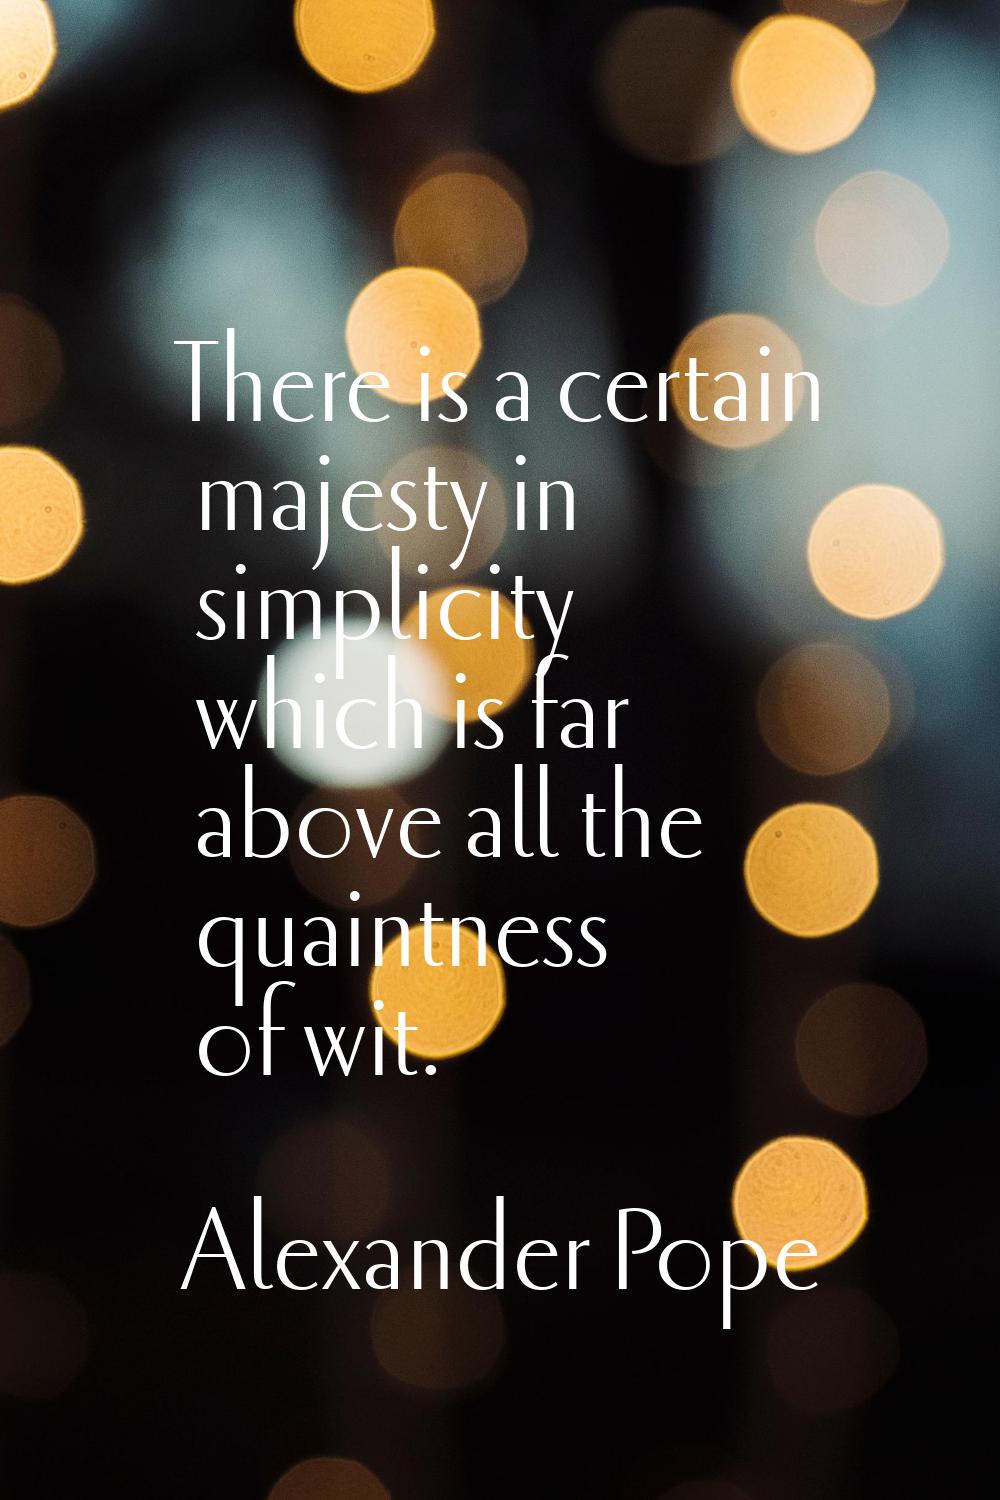 There is a certain majesty in simplicity which is far above all the quaintness of wit.